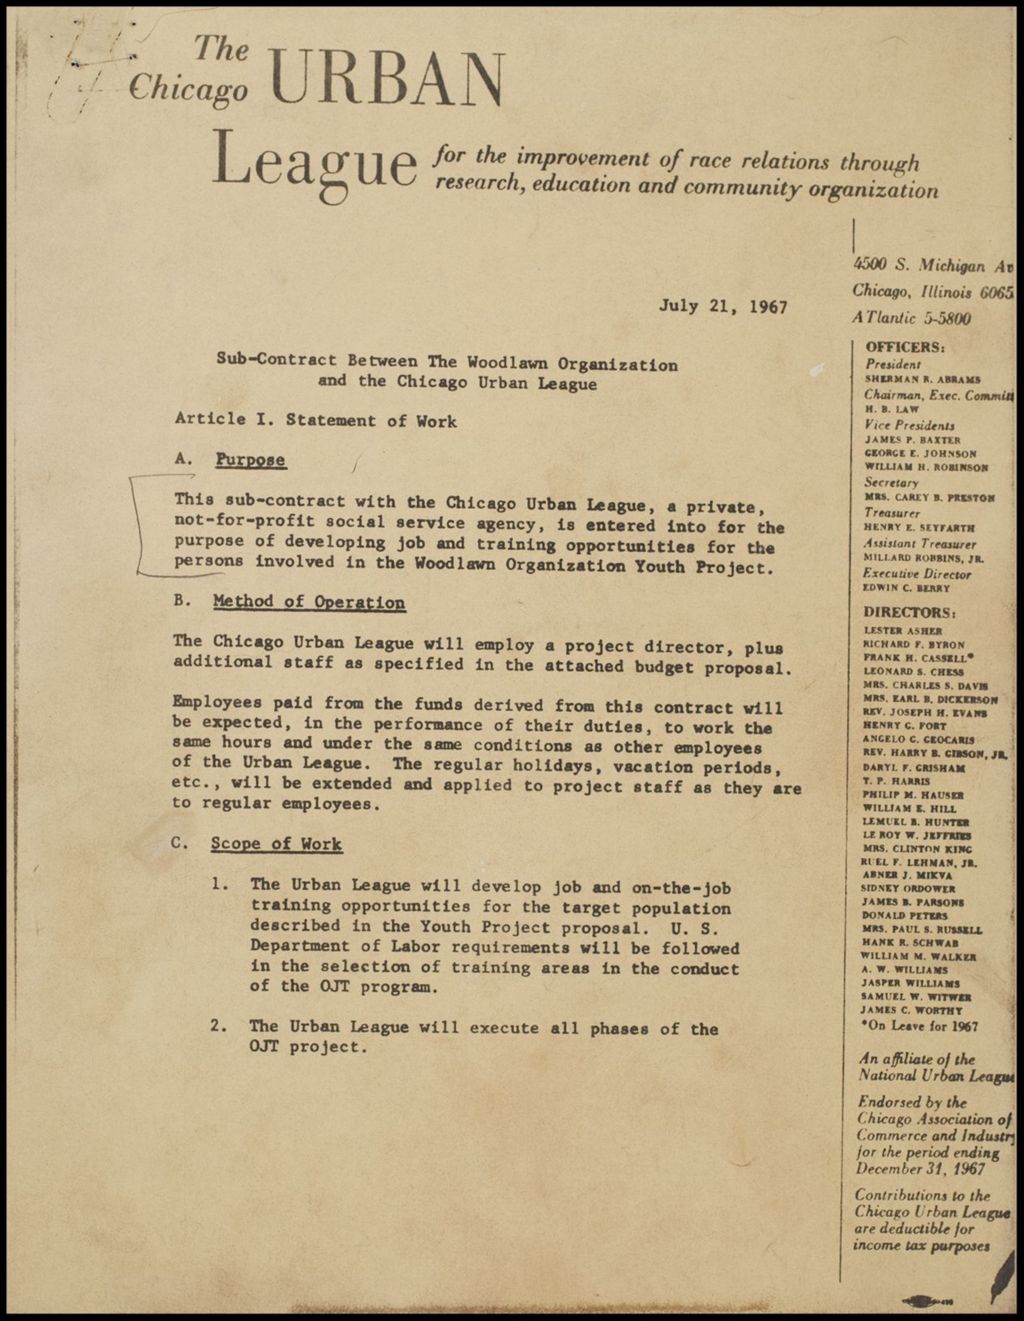 Miniature of Subcontract With Woodlawn Organization, 1967 (Folder II-79)